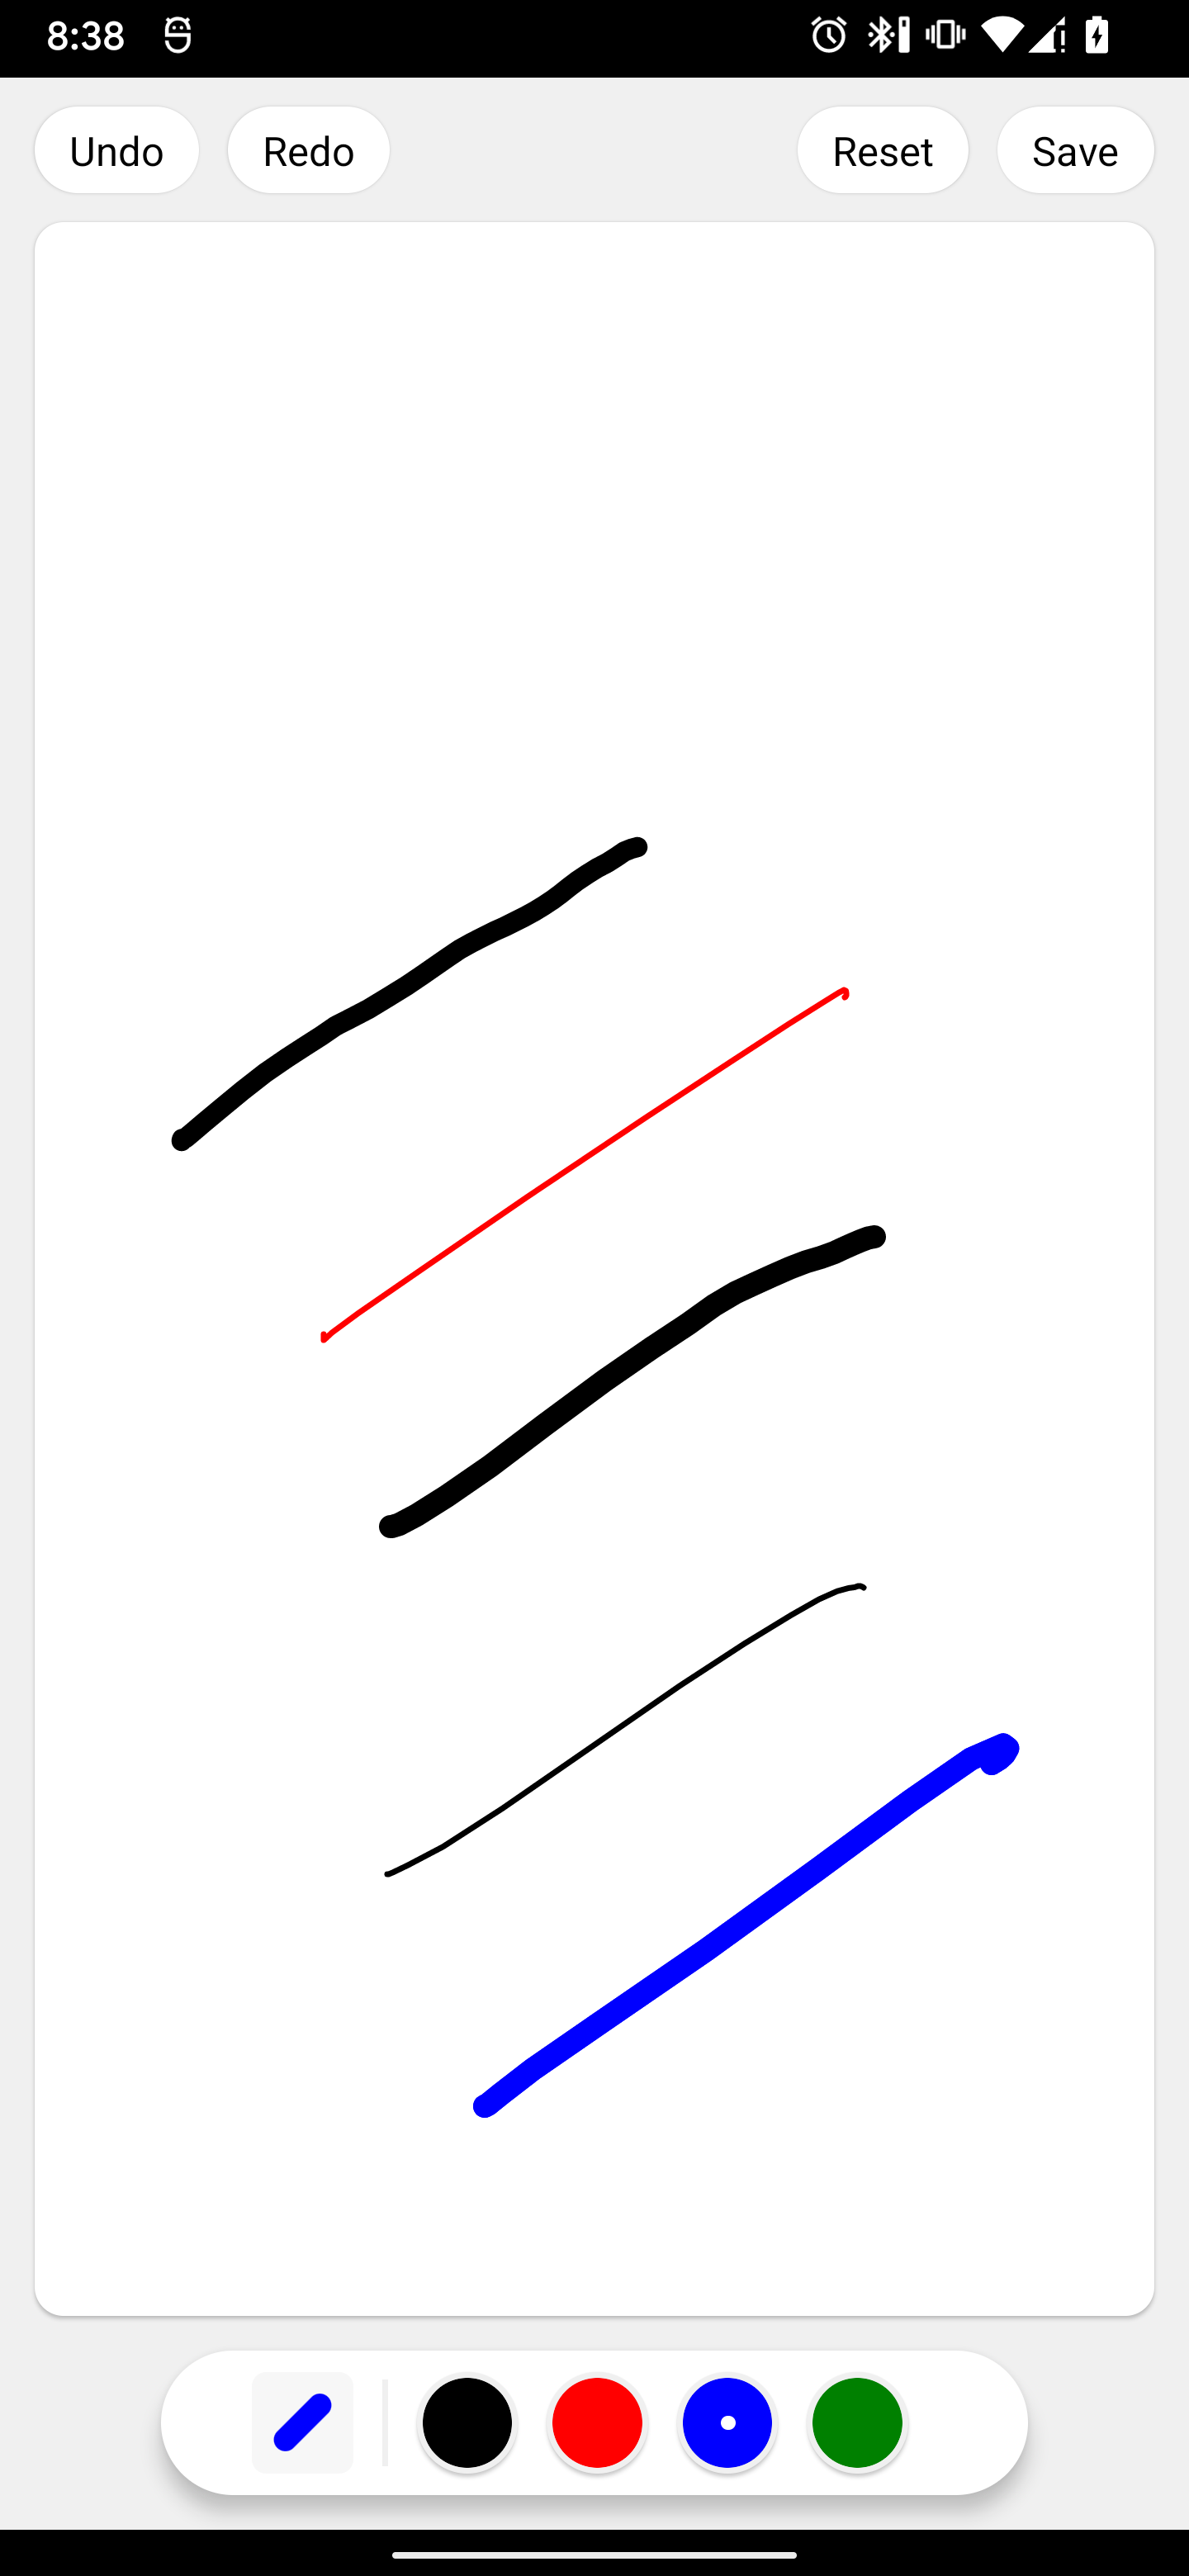 Various lines with different strokes drawn on the canvas using React Native Skia